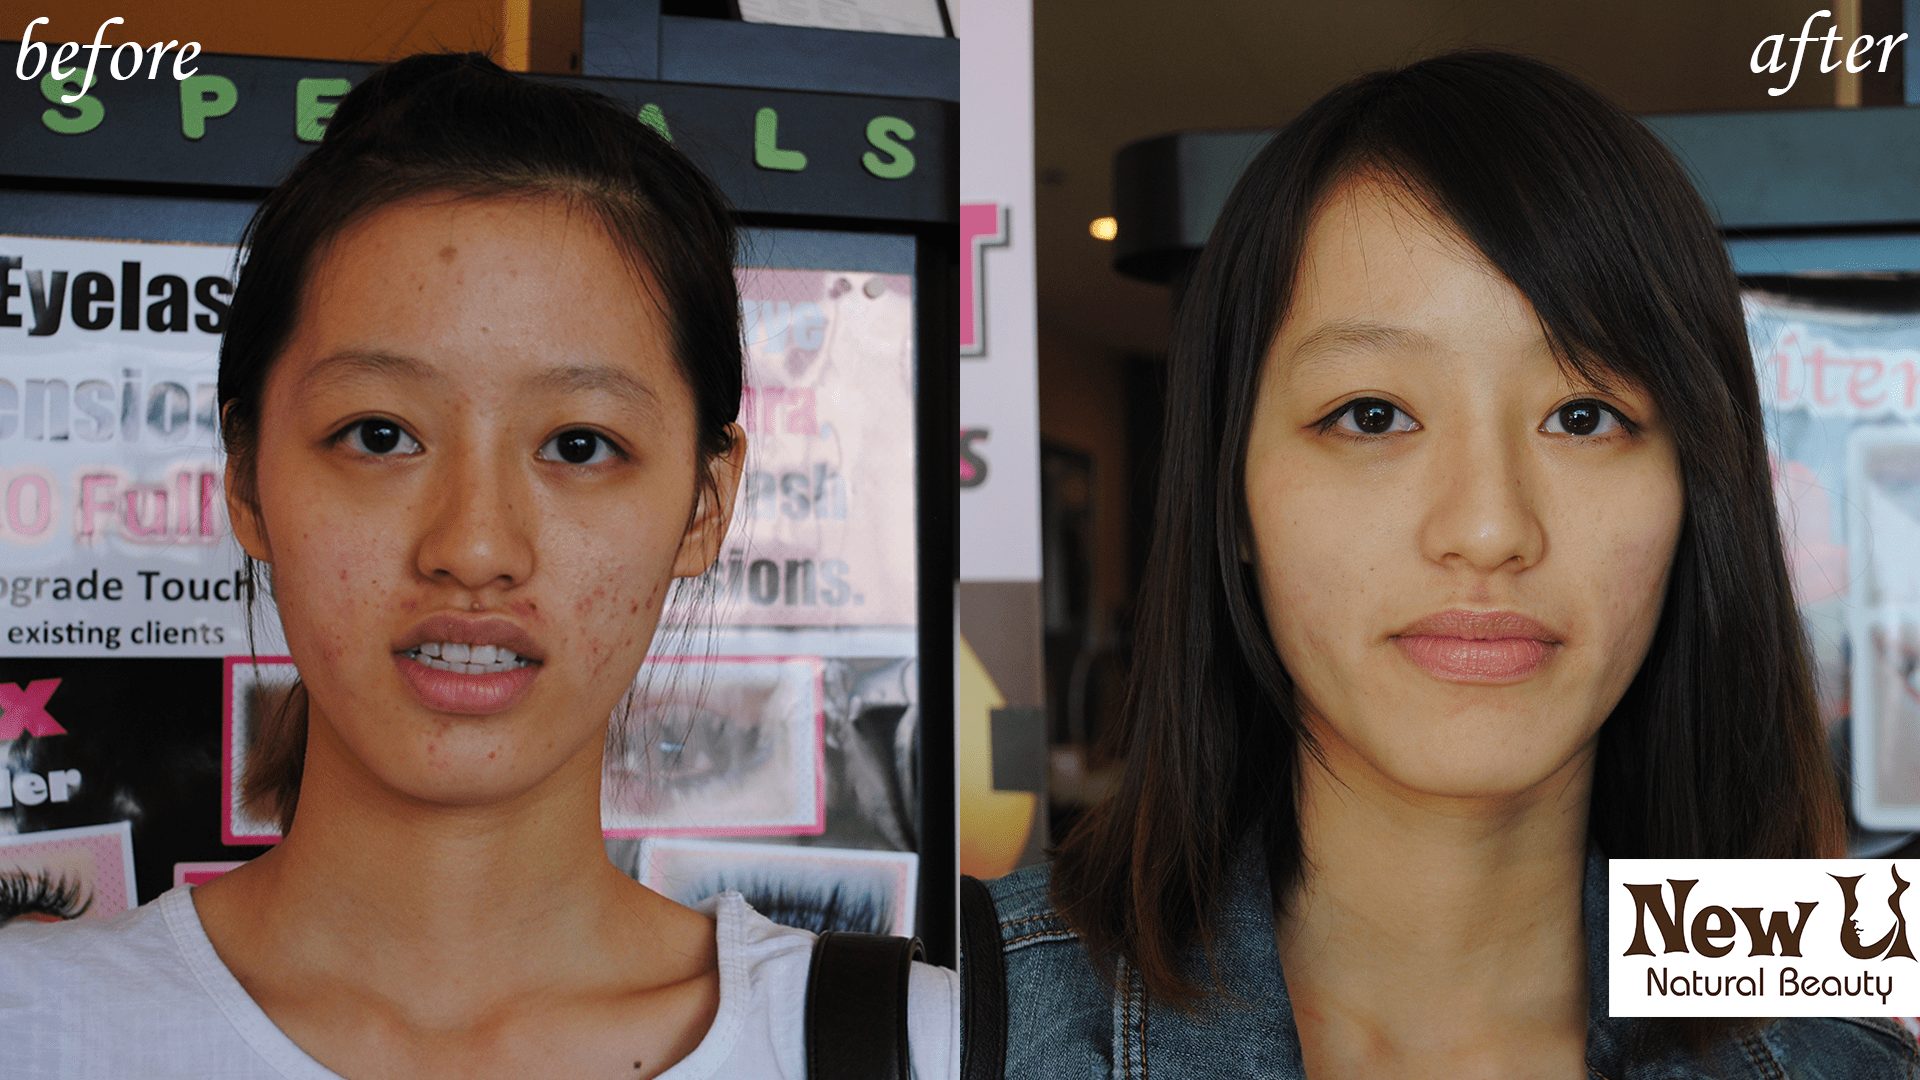 Acne Treatment 1 Las Vegas Before and After